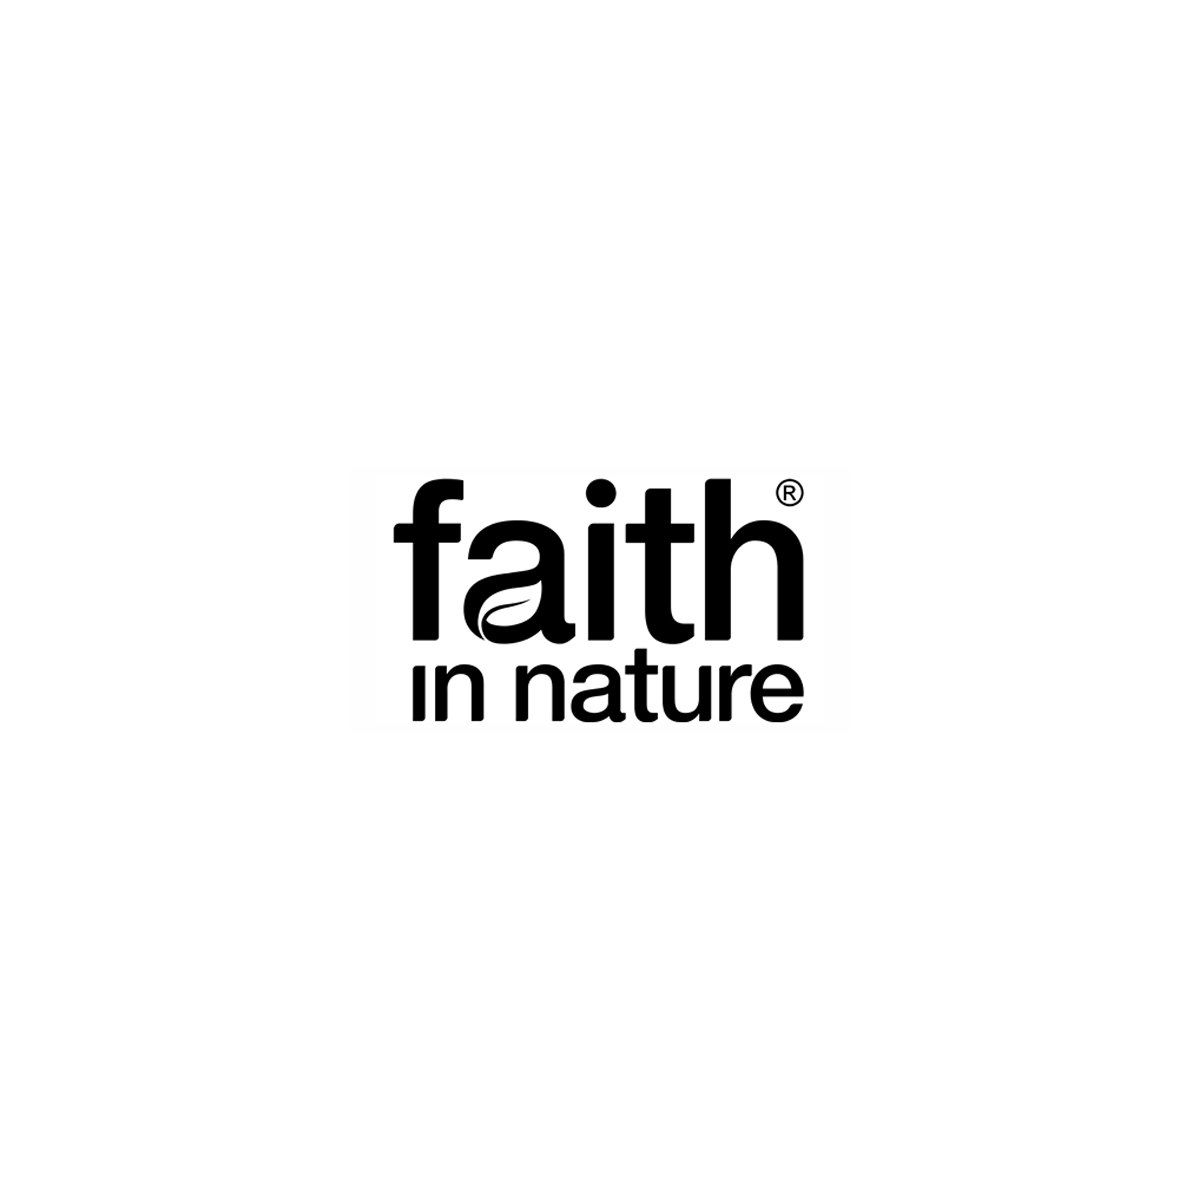 Where to Buy Faith in Nature Products